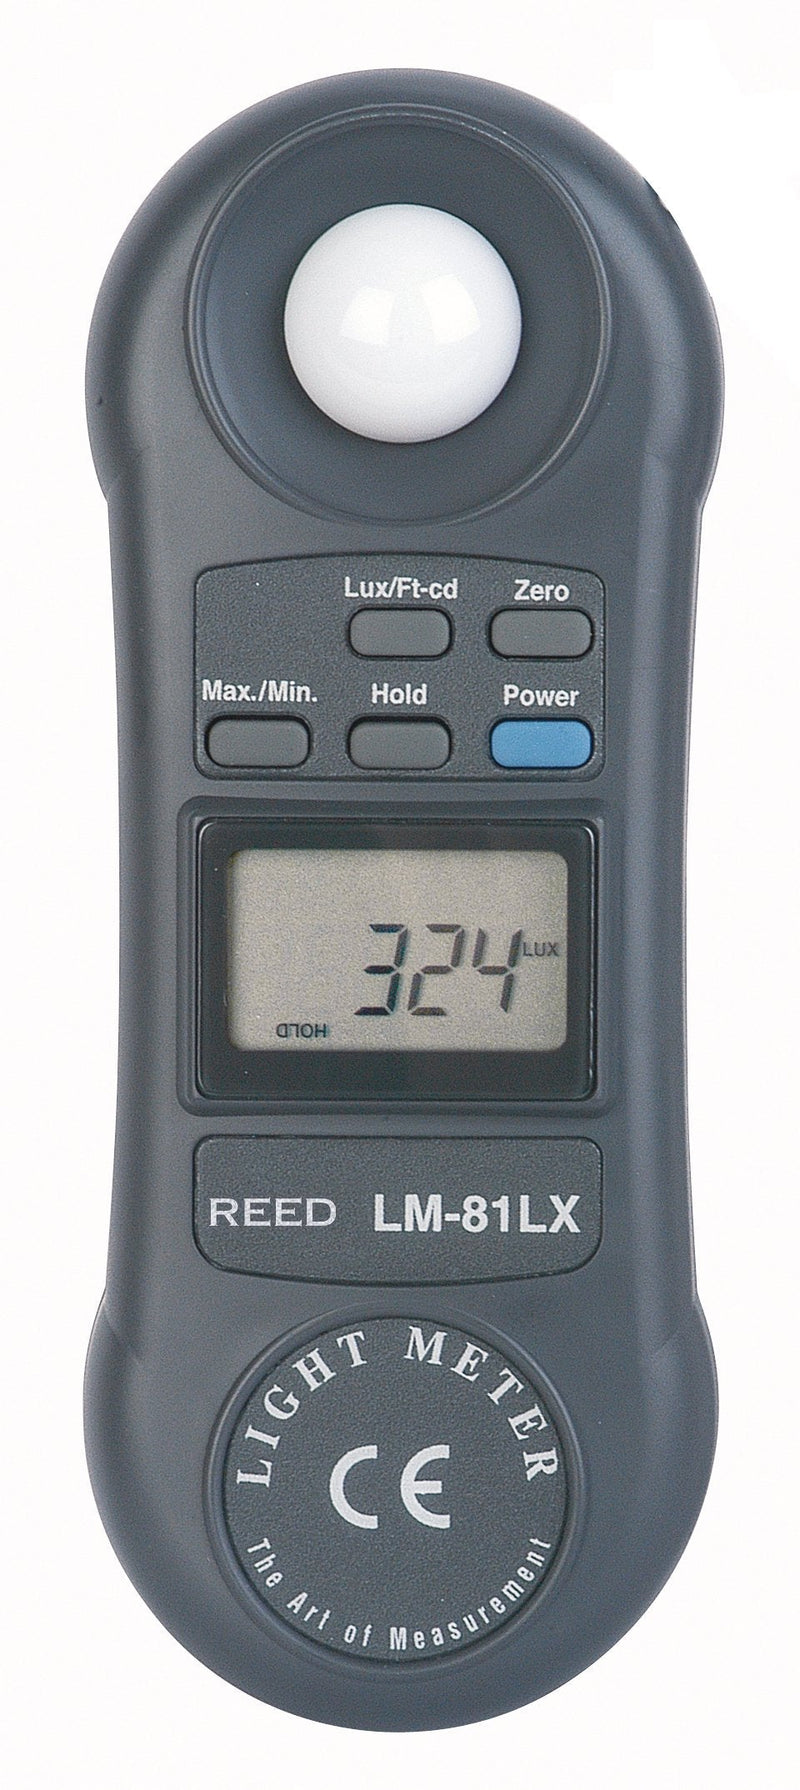 REED Instruments LM-81LX Compact Light Meter, 20,000 Lux / 2,000 Foot Candles (Fc) Standard